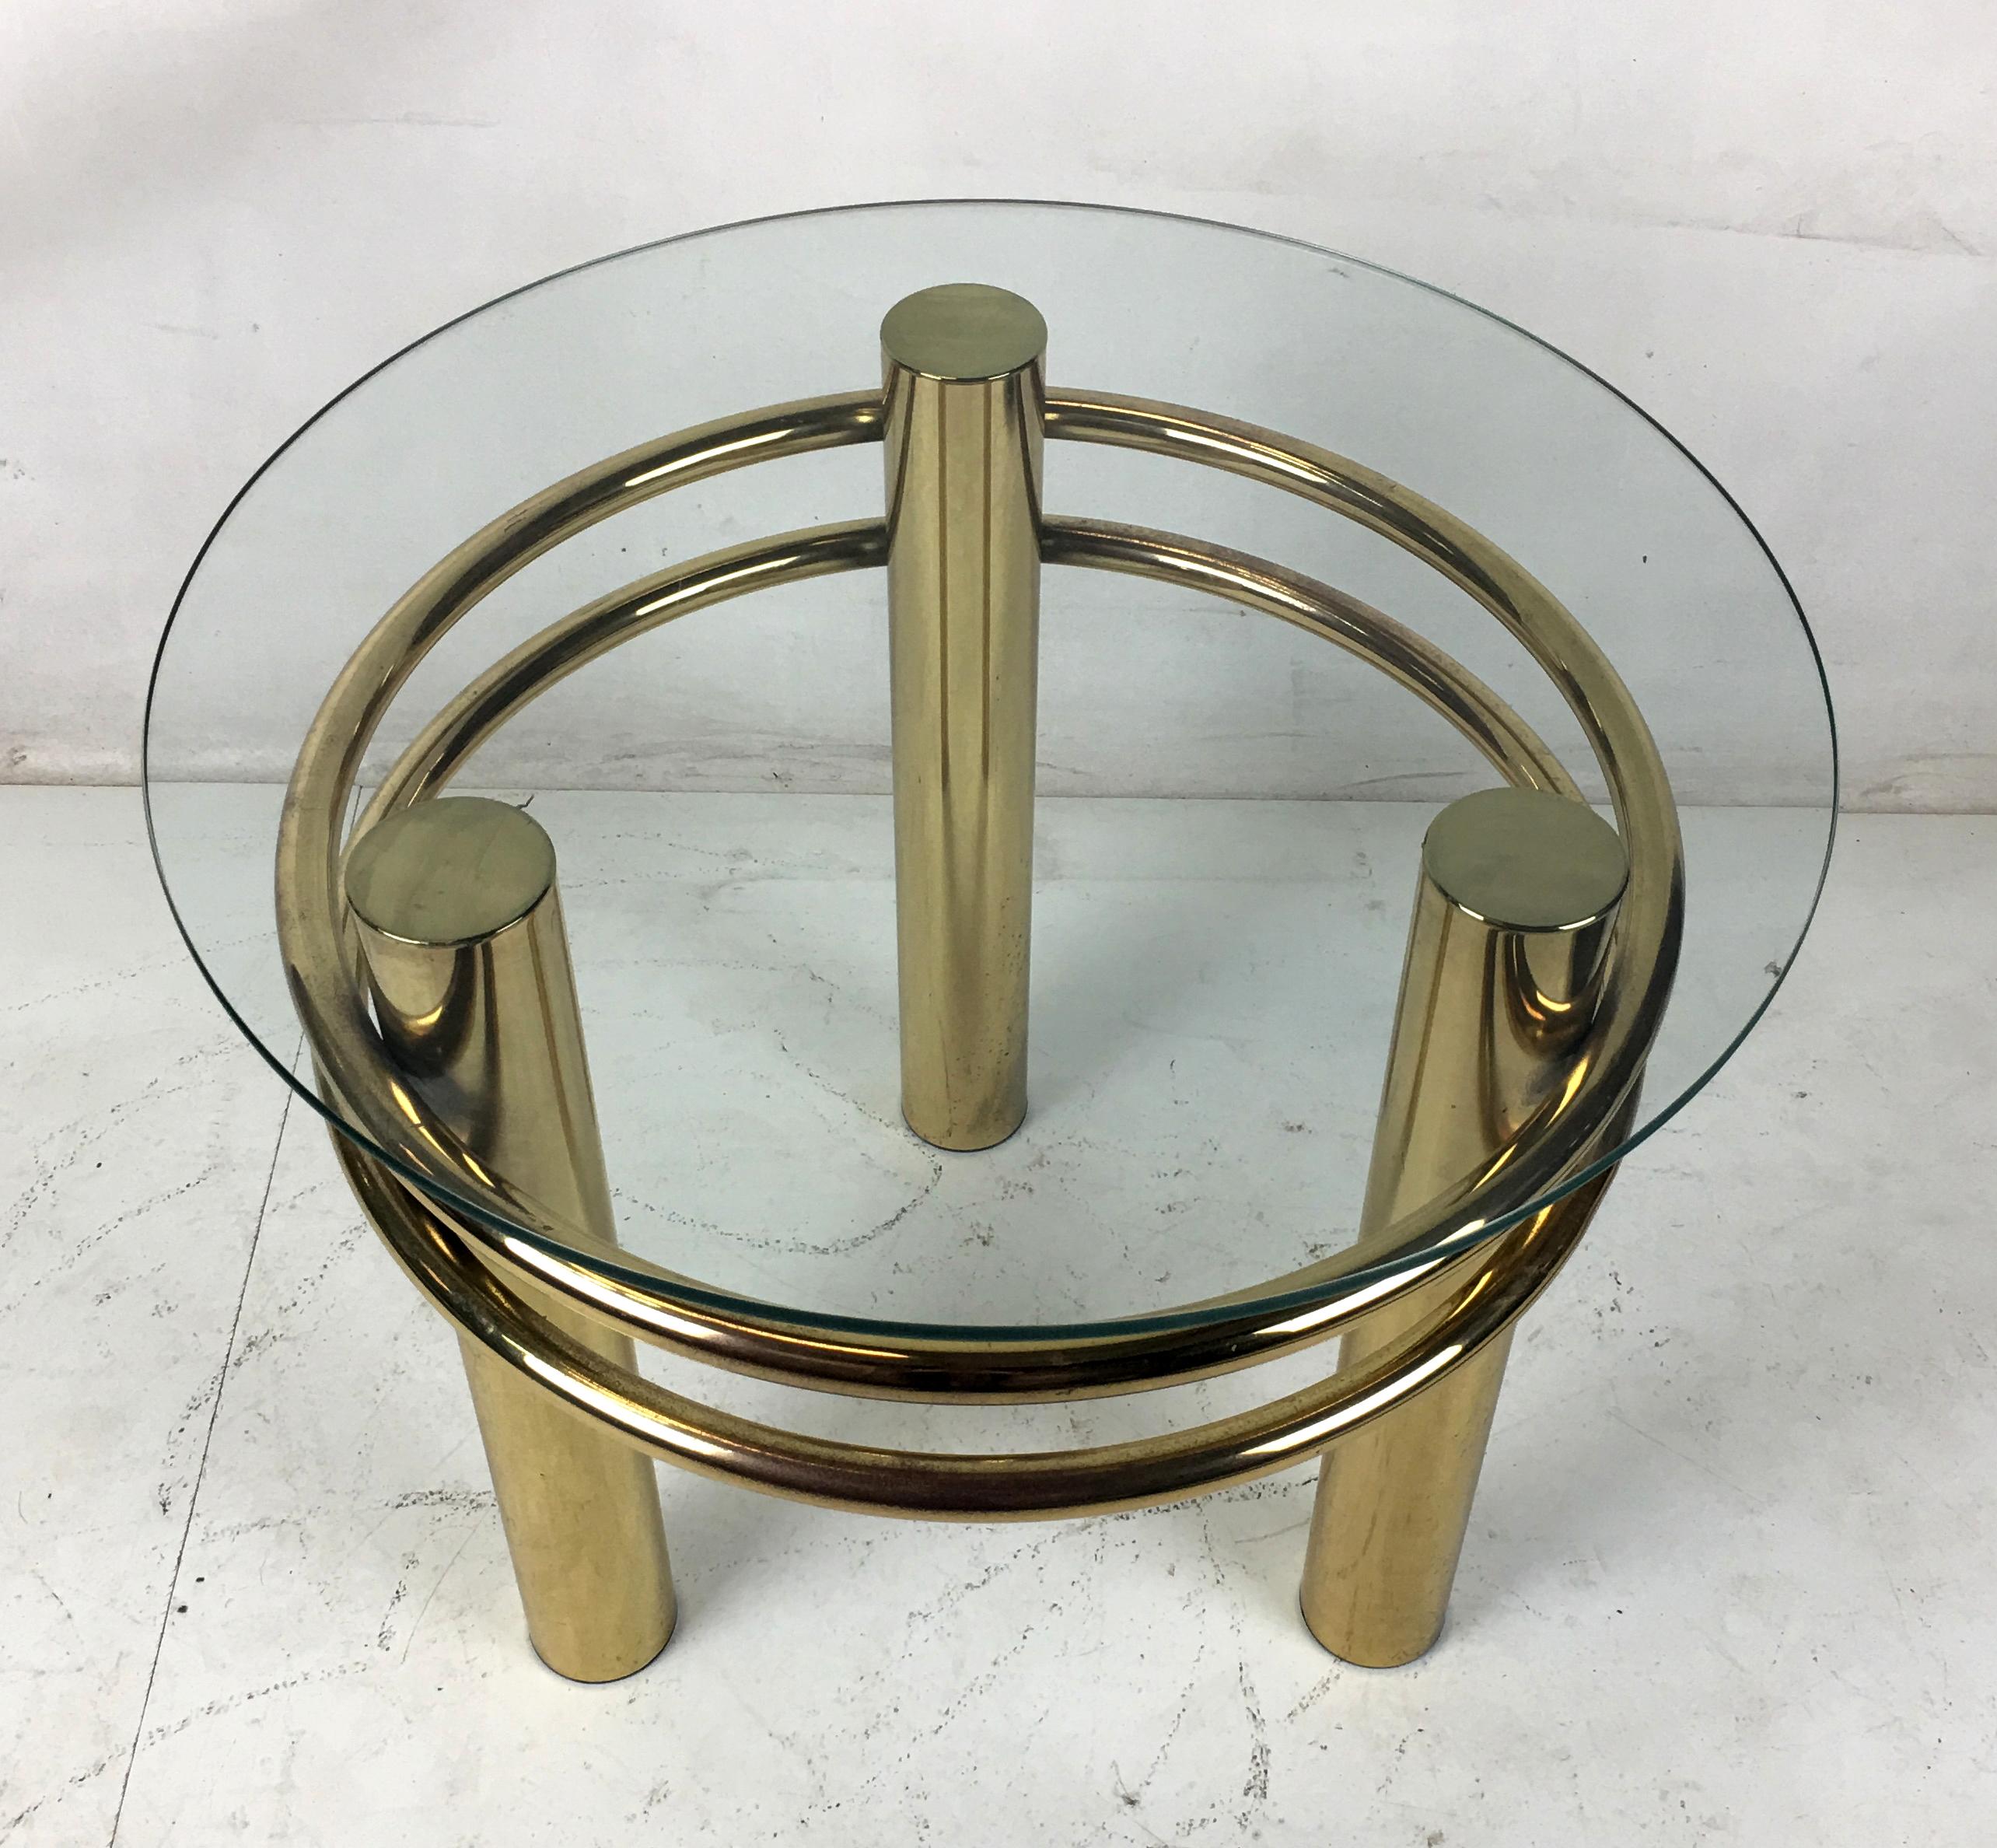 Dramatic side table with glass top in the 1980s taste with large diameter brass supports. The table goes great with its glass top or buyer-supplied marble top.